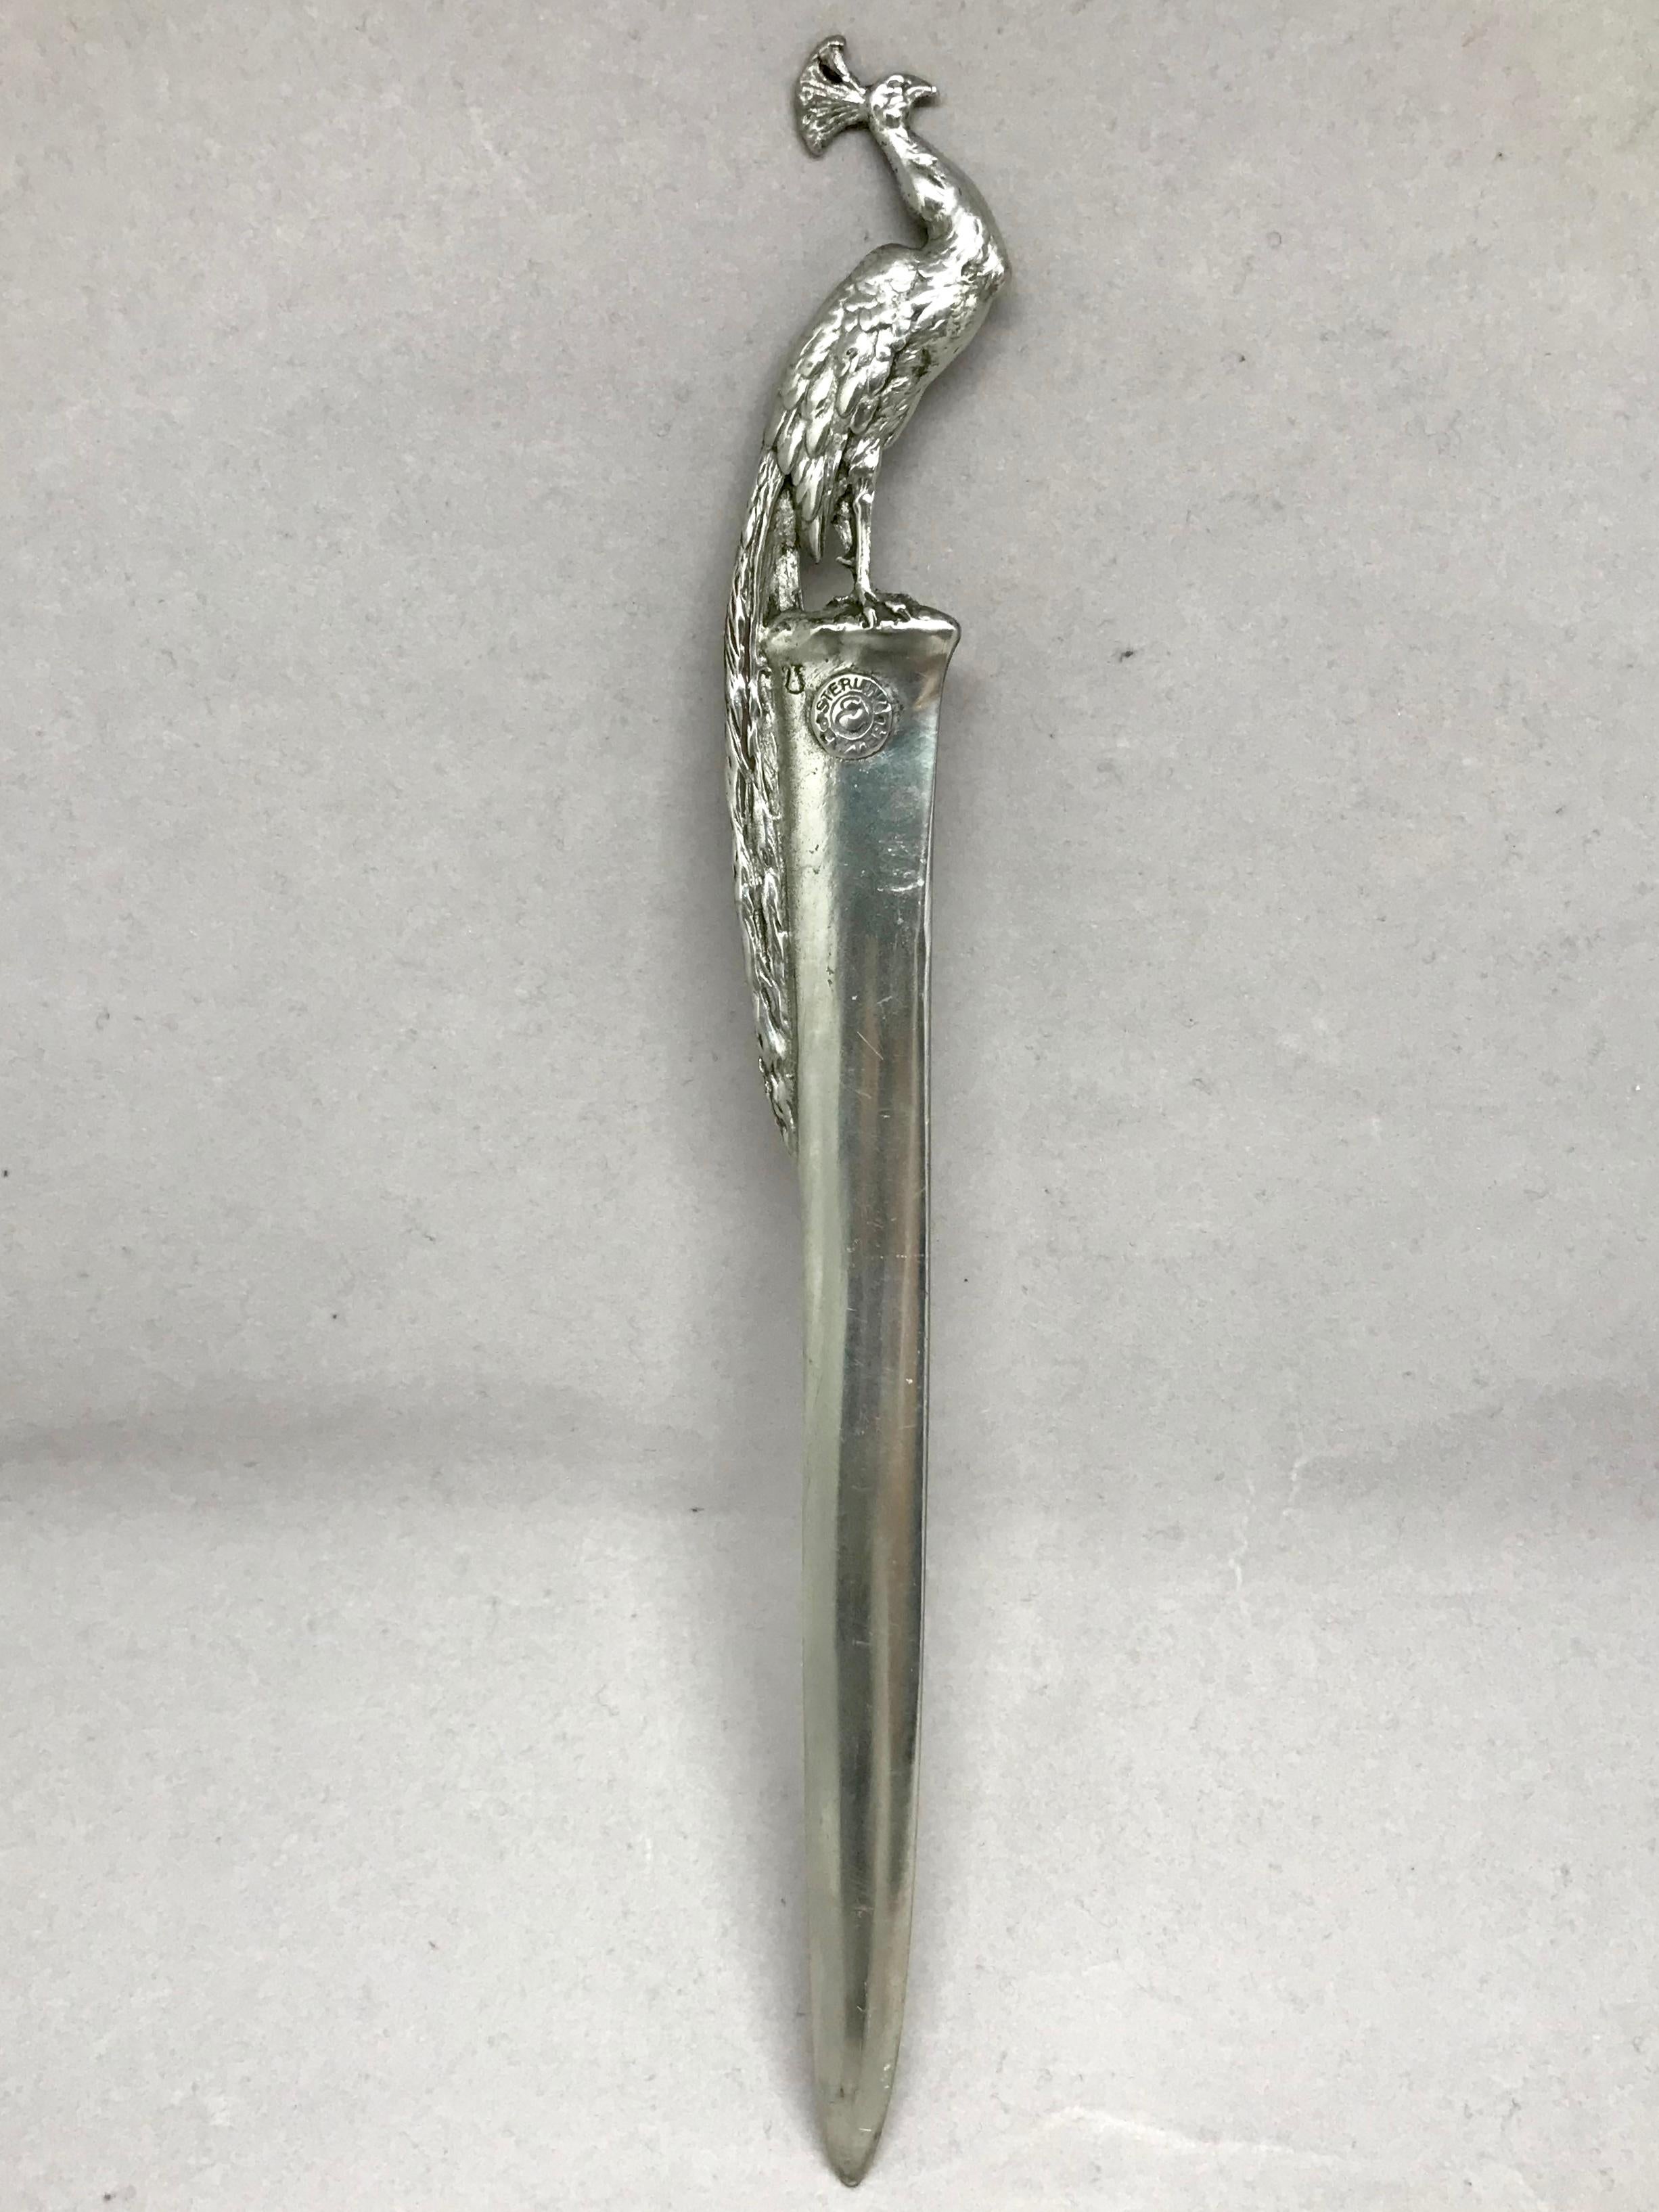 Silver peacock letter opener. Vintage silvered pewter letter opener with peacock stamped E. United States, 1940s.
Dimensions: 9.38